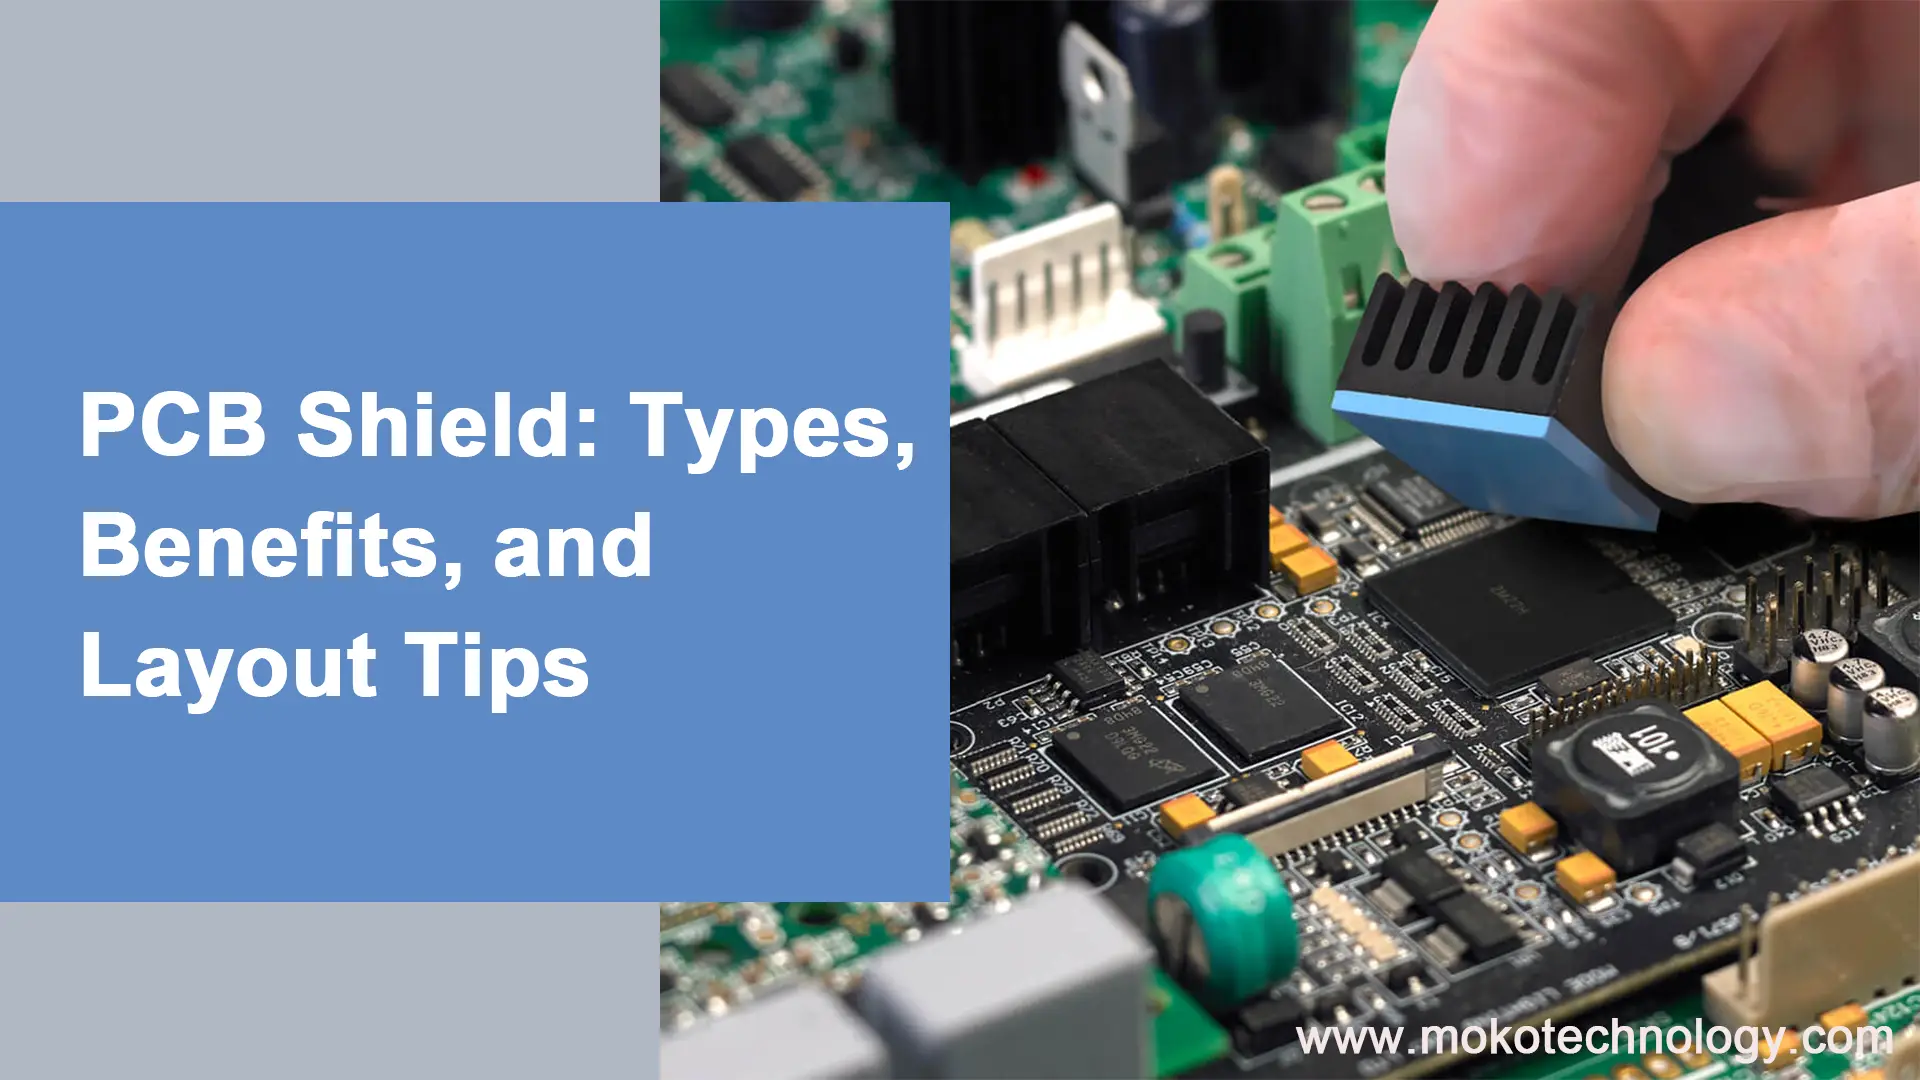 PCB Shield: Types, Benefits, and Layout Tips